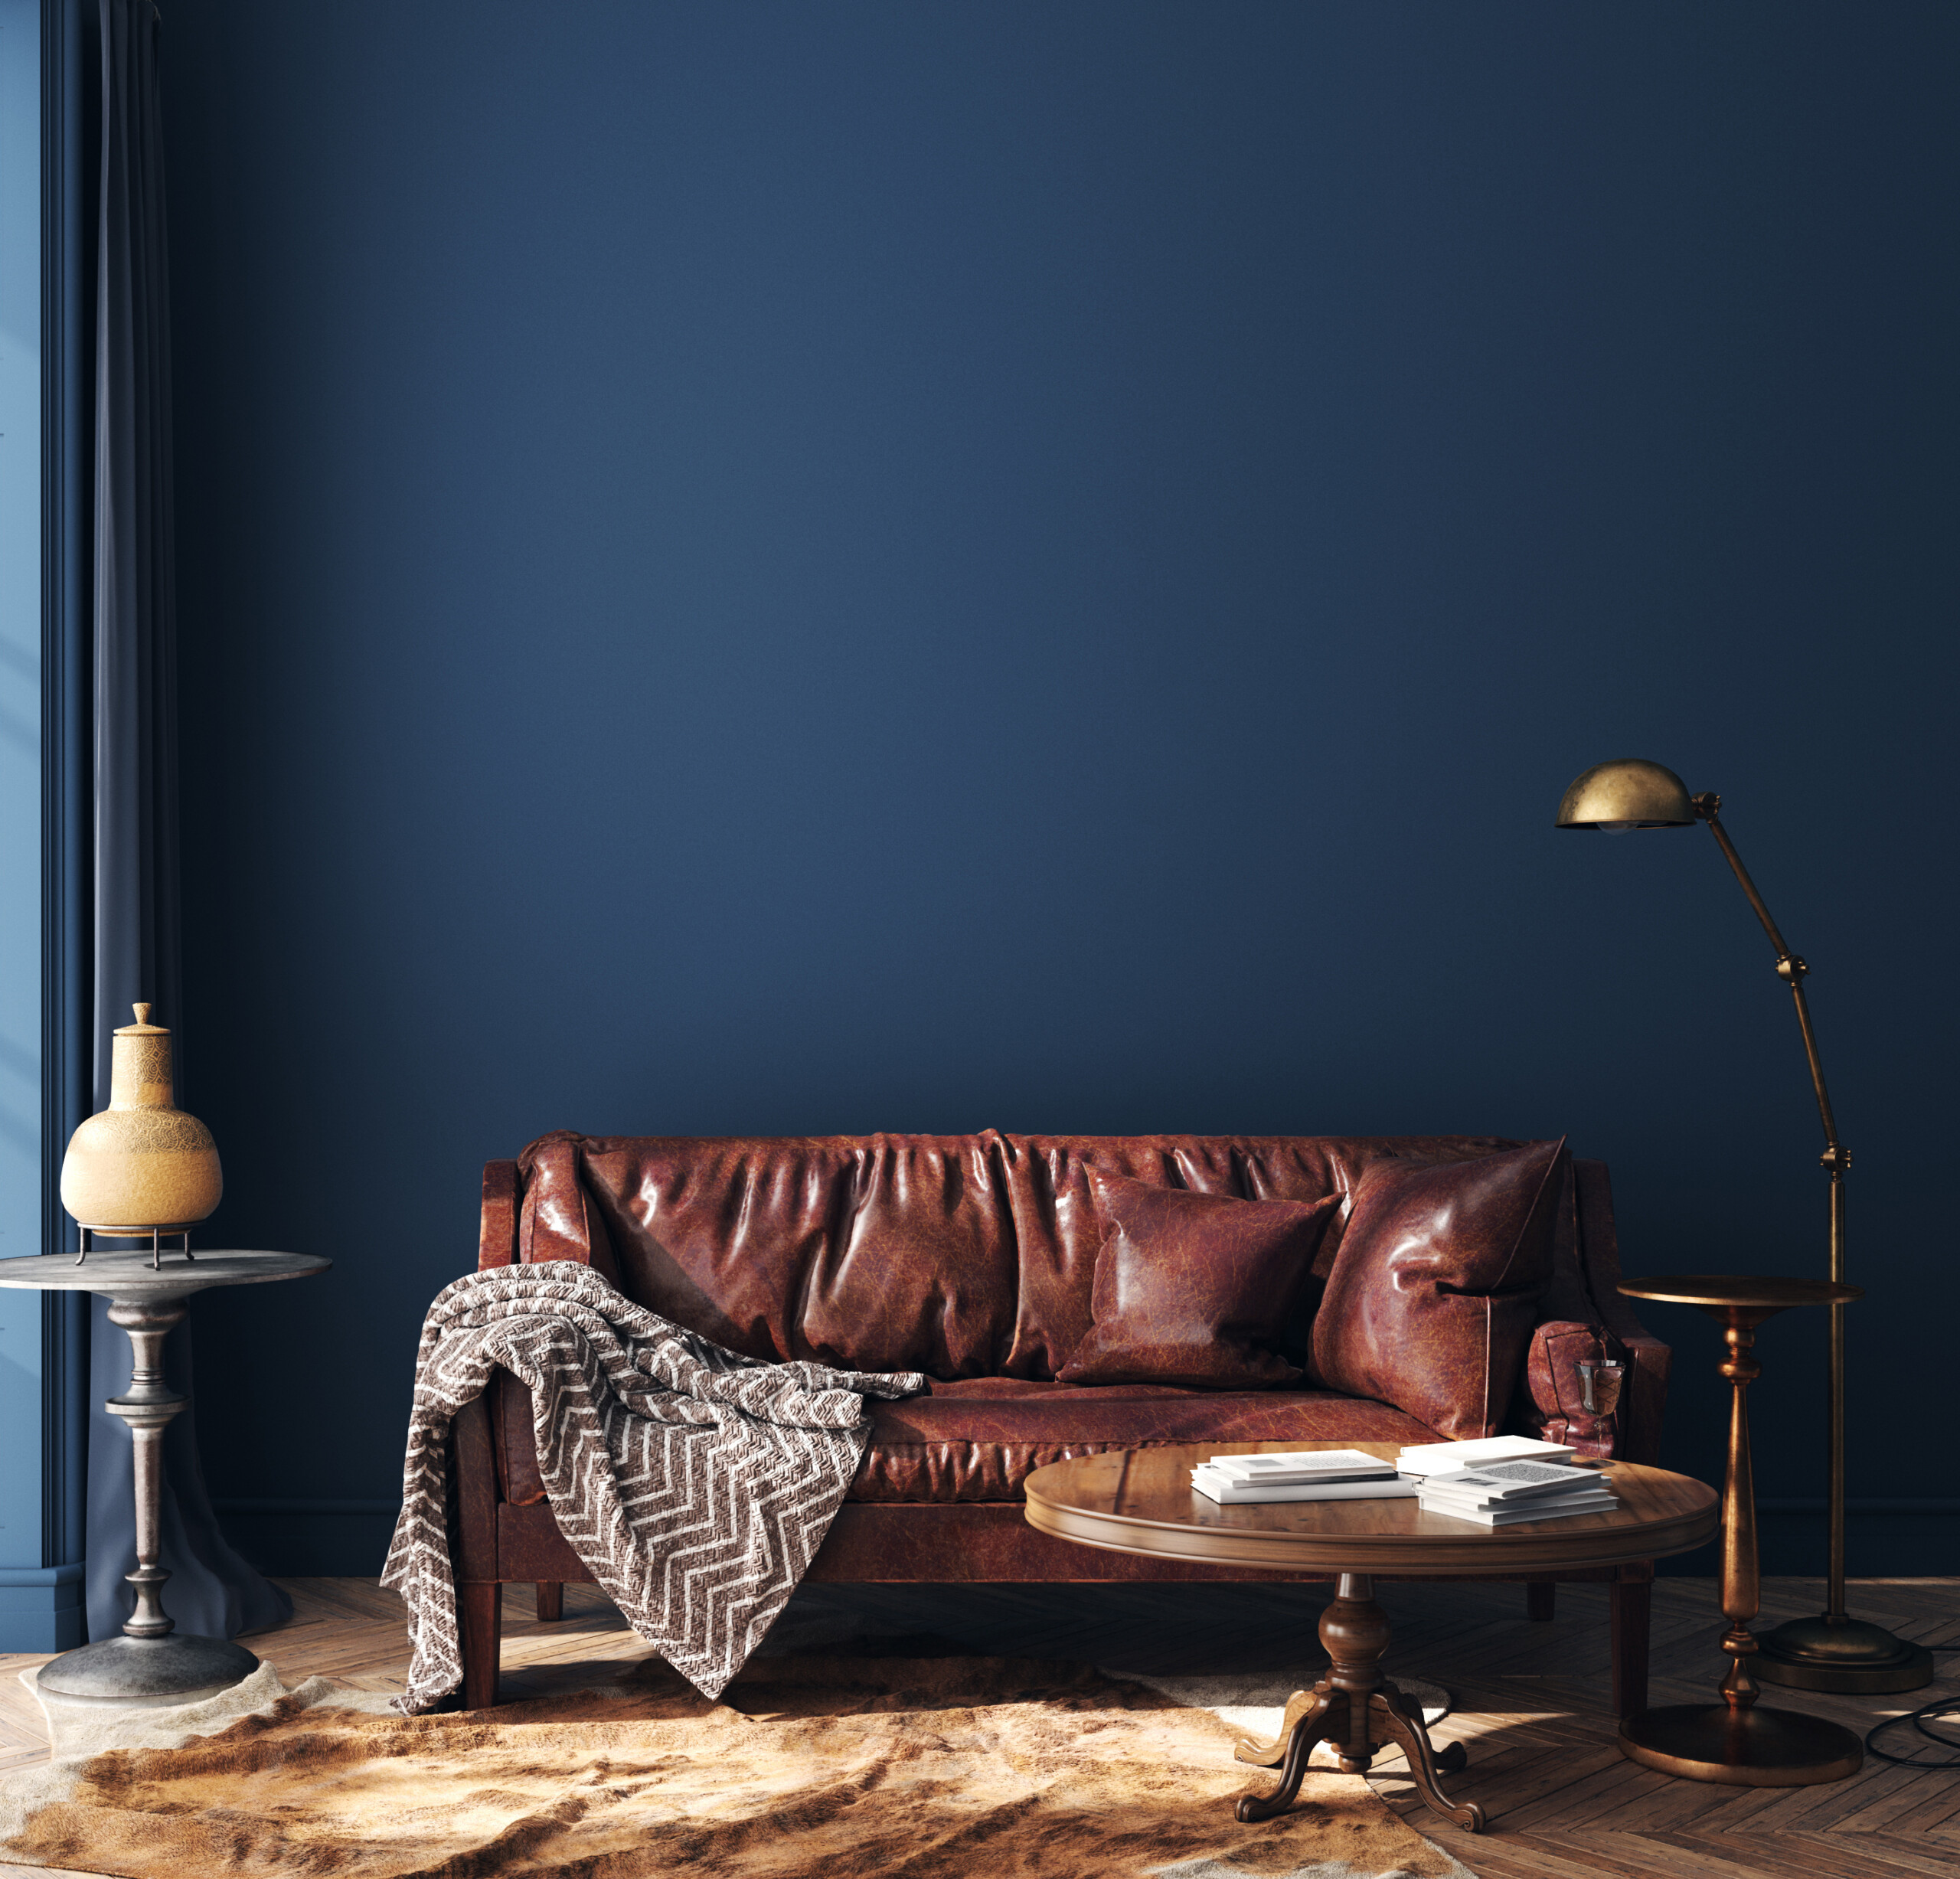 The Surprising Dark Accent Walls Trend To Try - Décor Aid